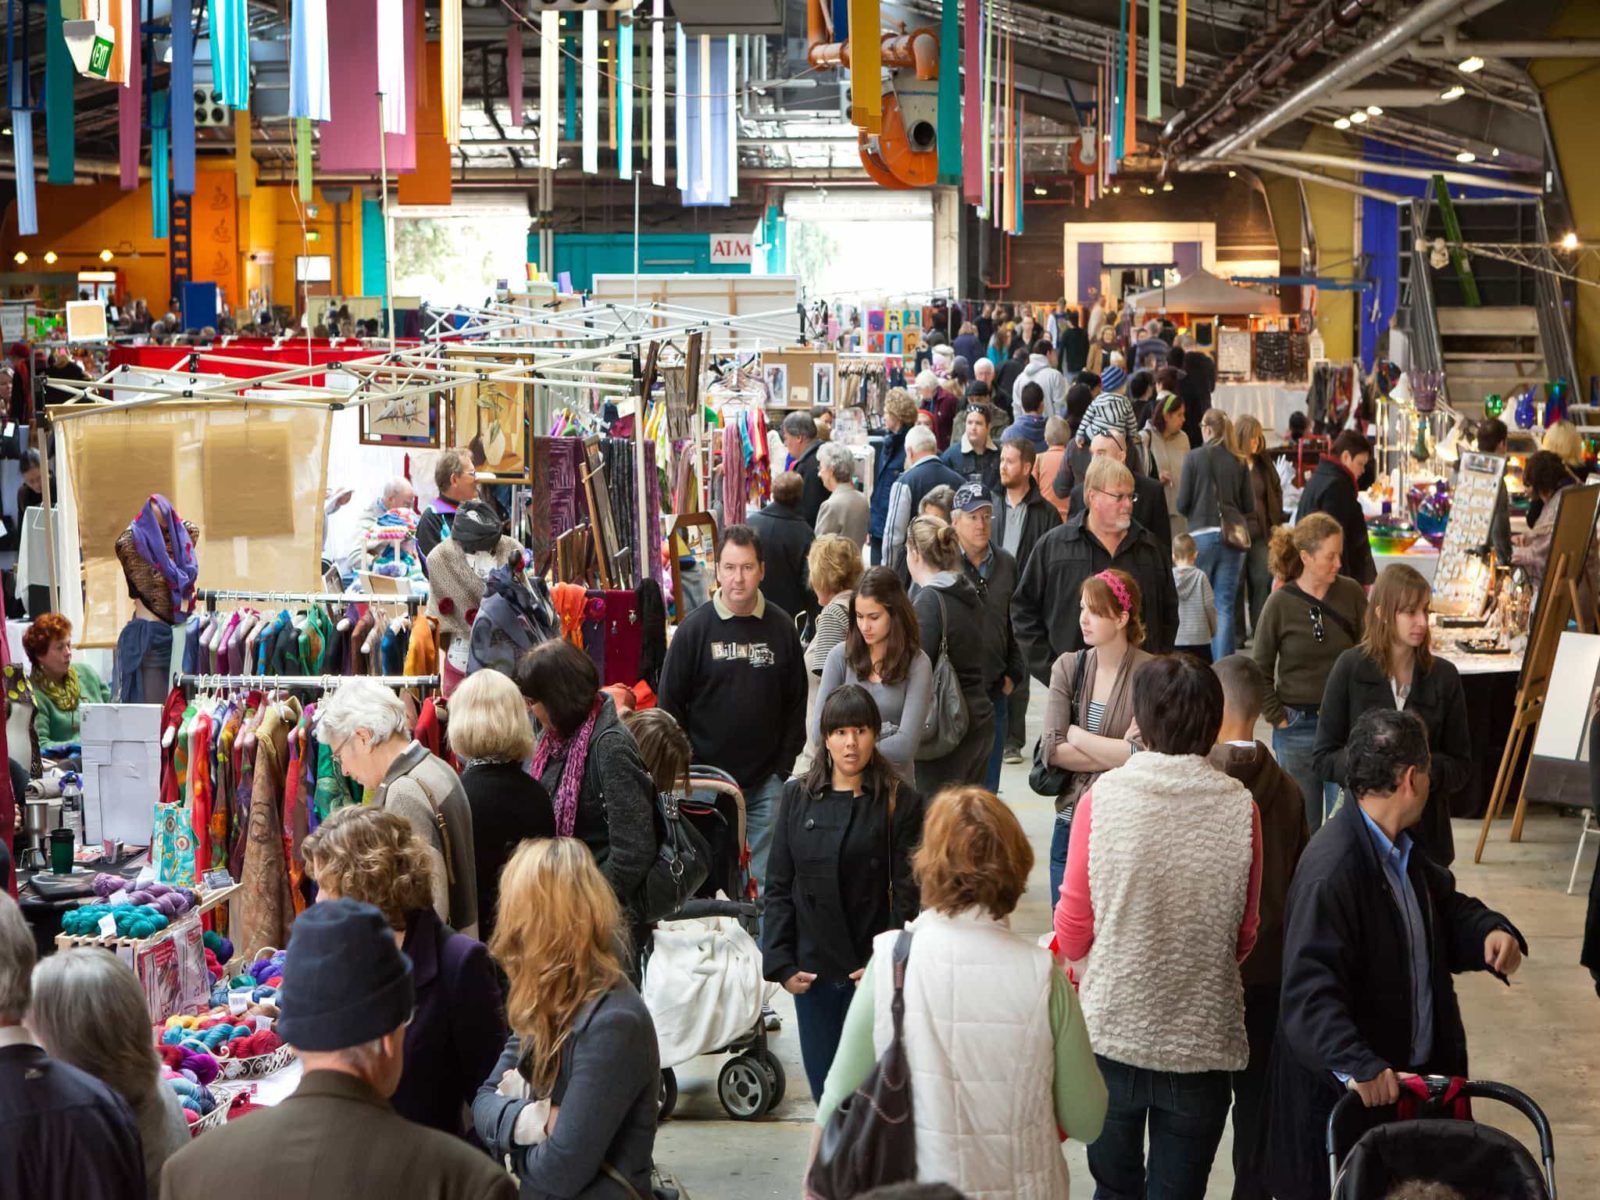 The hustle and bustle of visitors of stallholders at the Old Bus Depot Markets